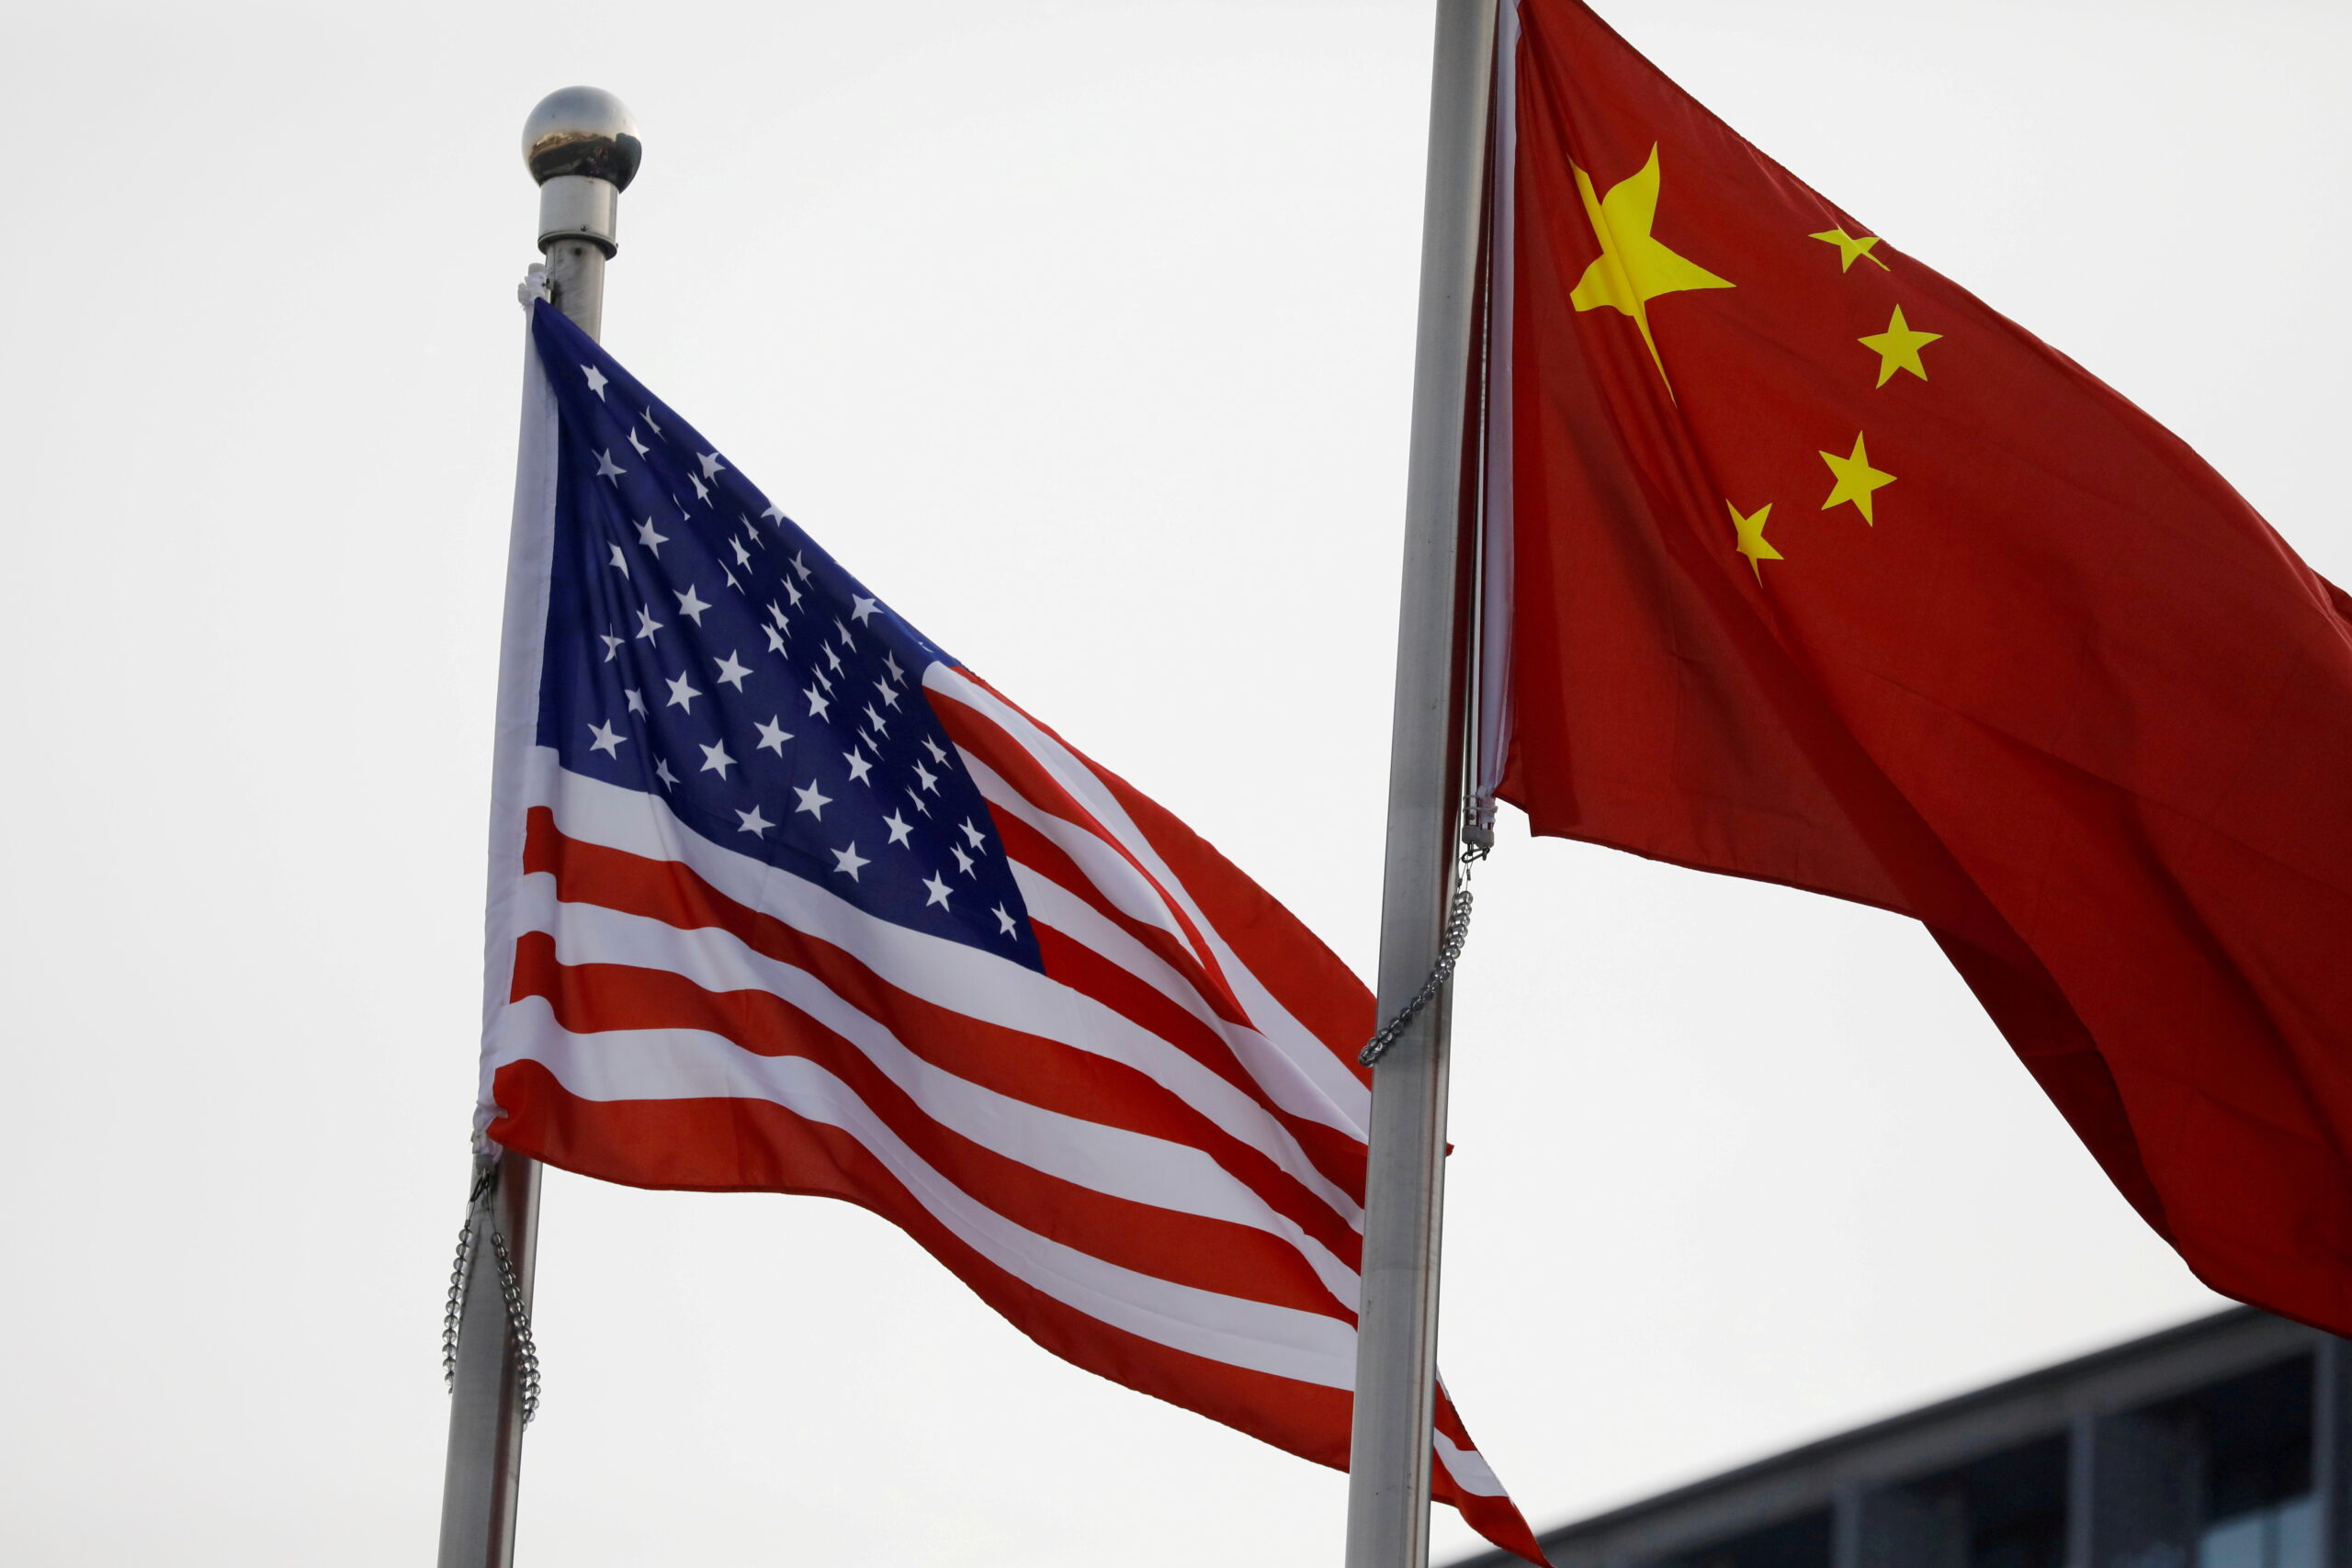  China dismisses U.S. accusation of global hacking campaign